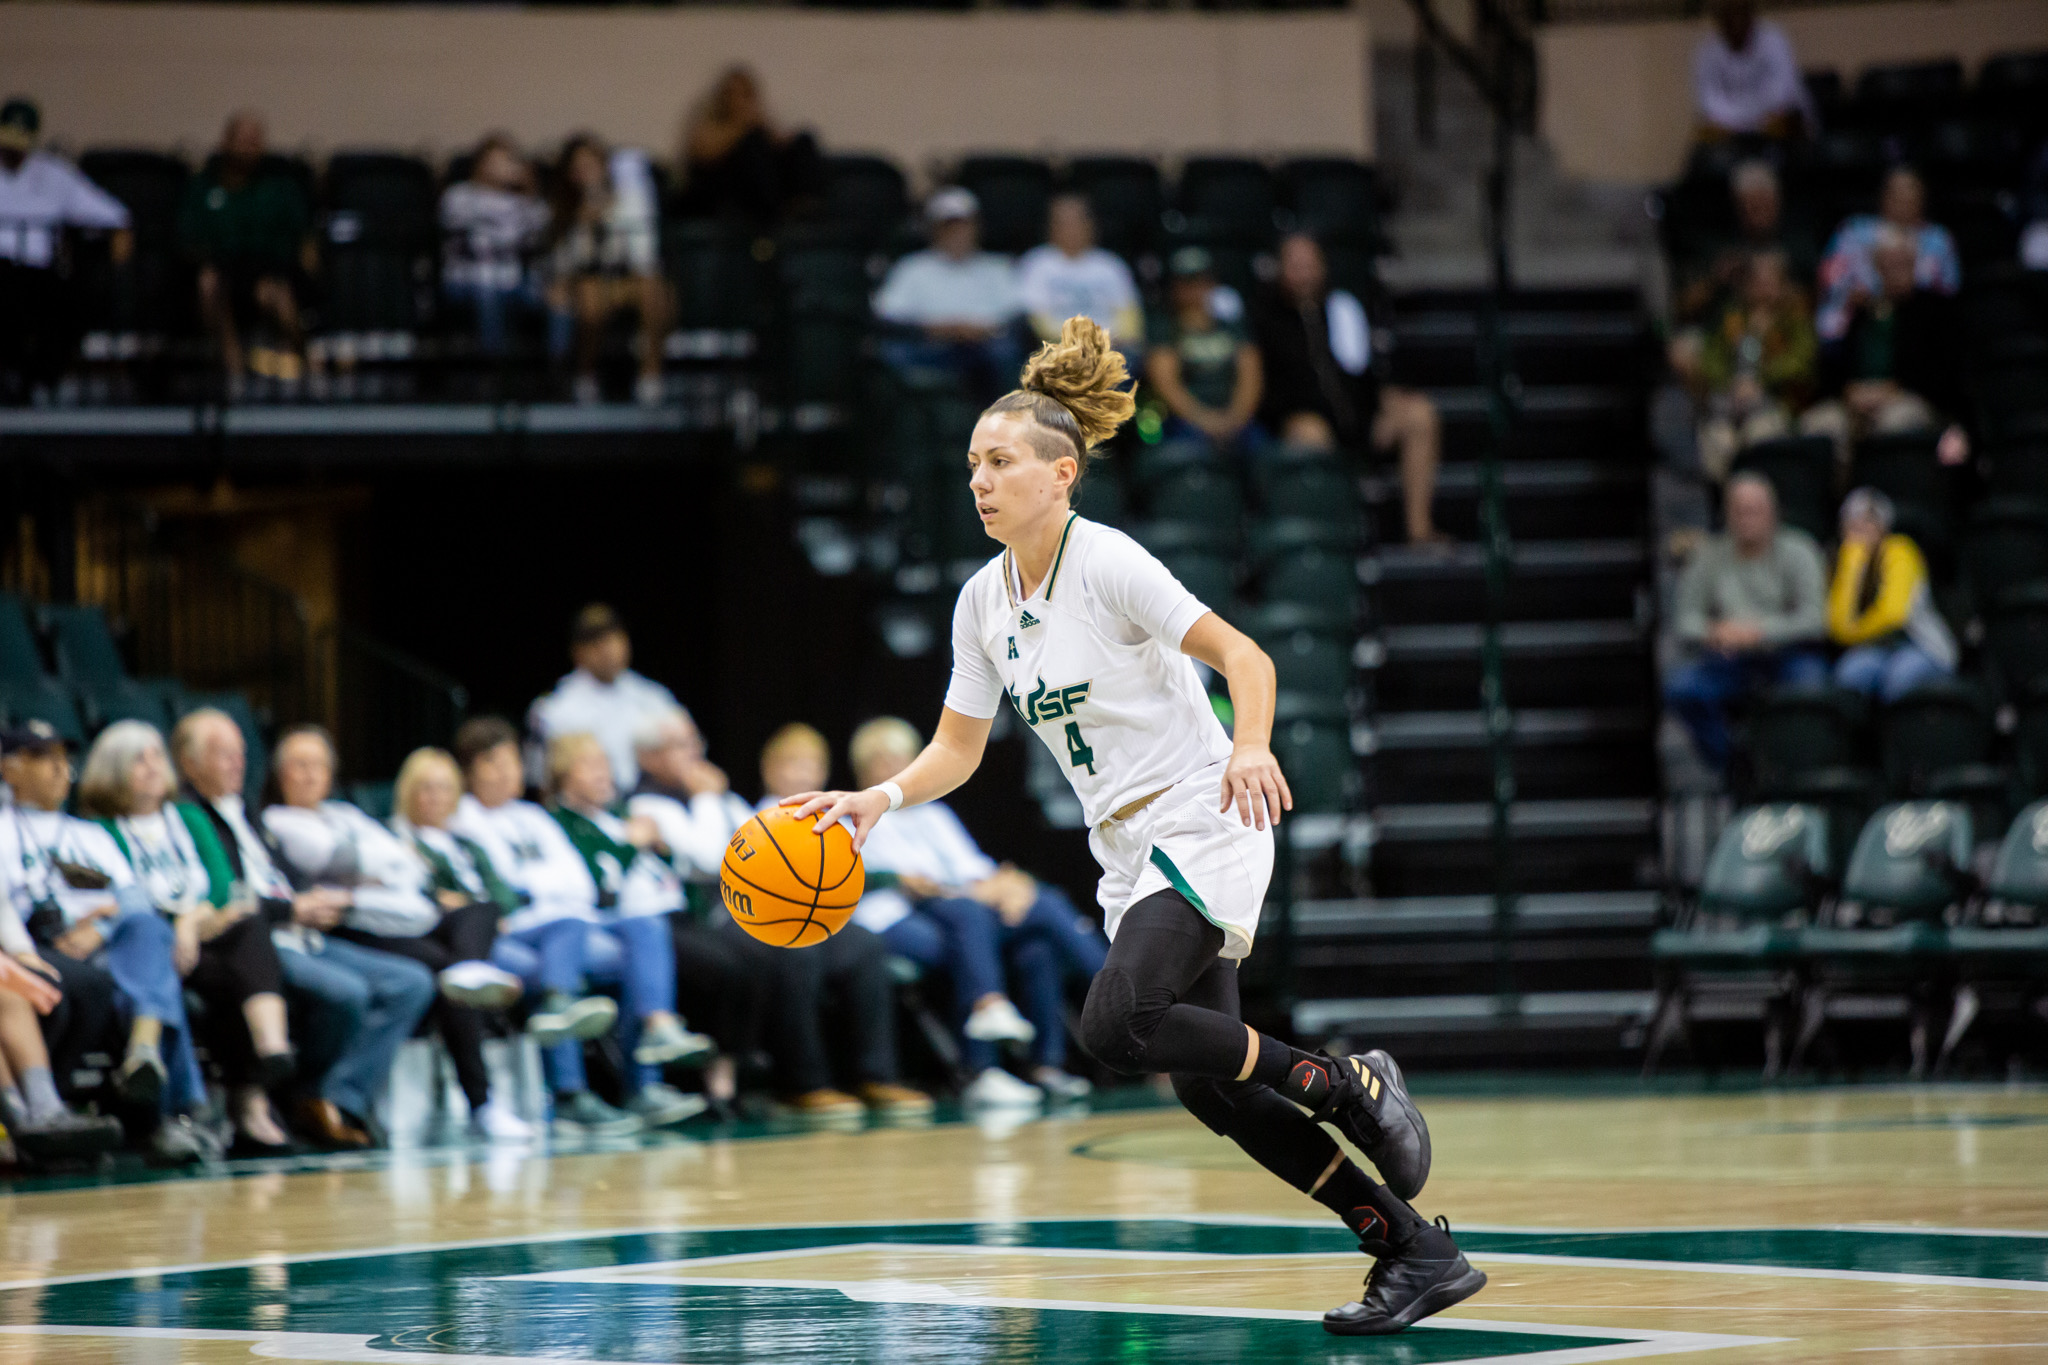 No. 23 USF beats No. 9 Oregon for first win over ranked team this season